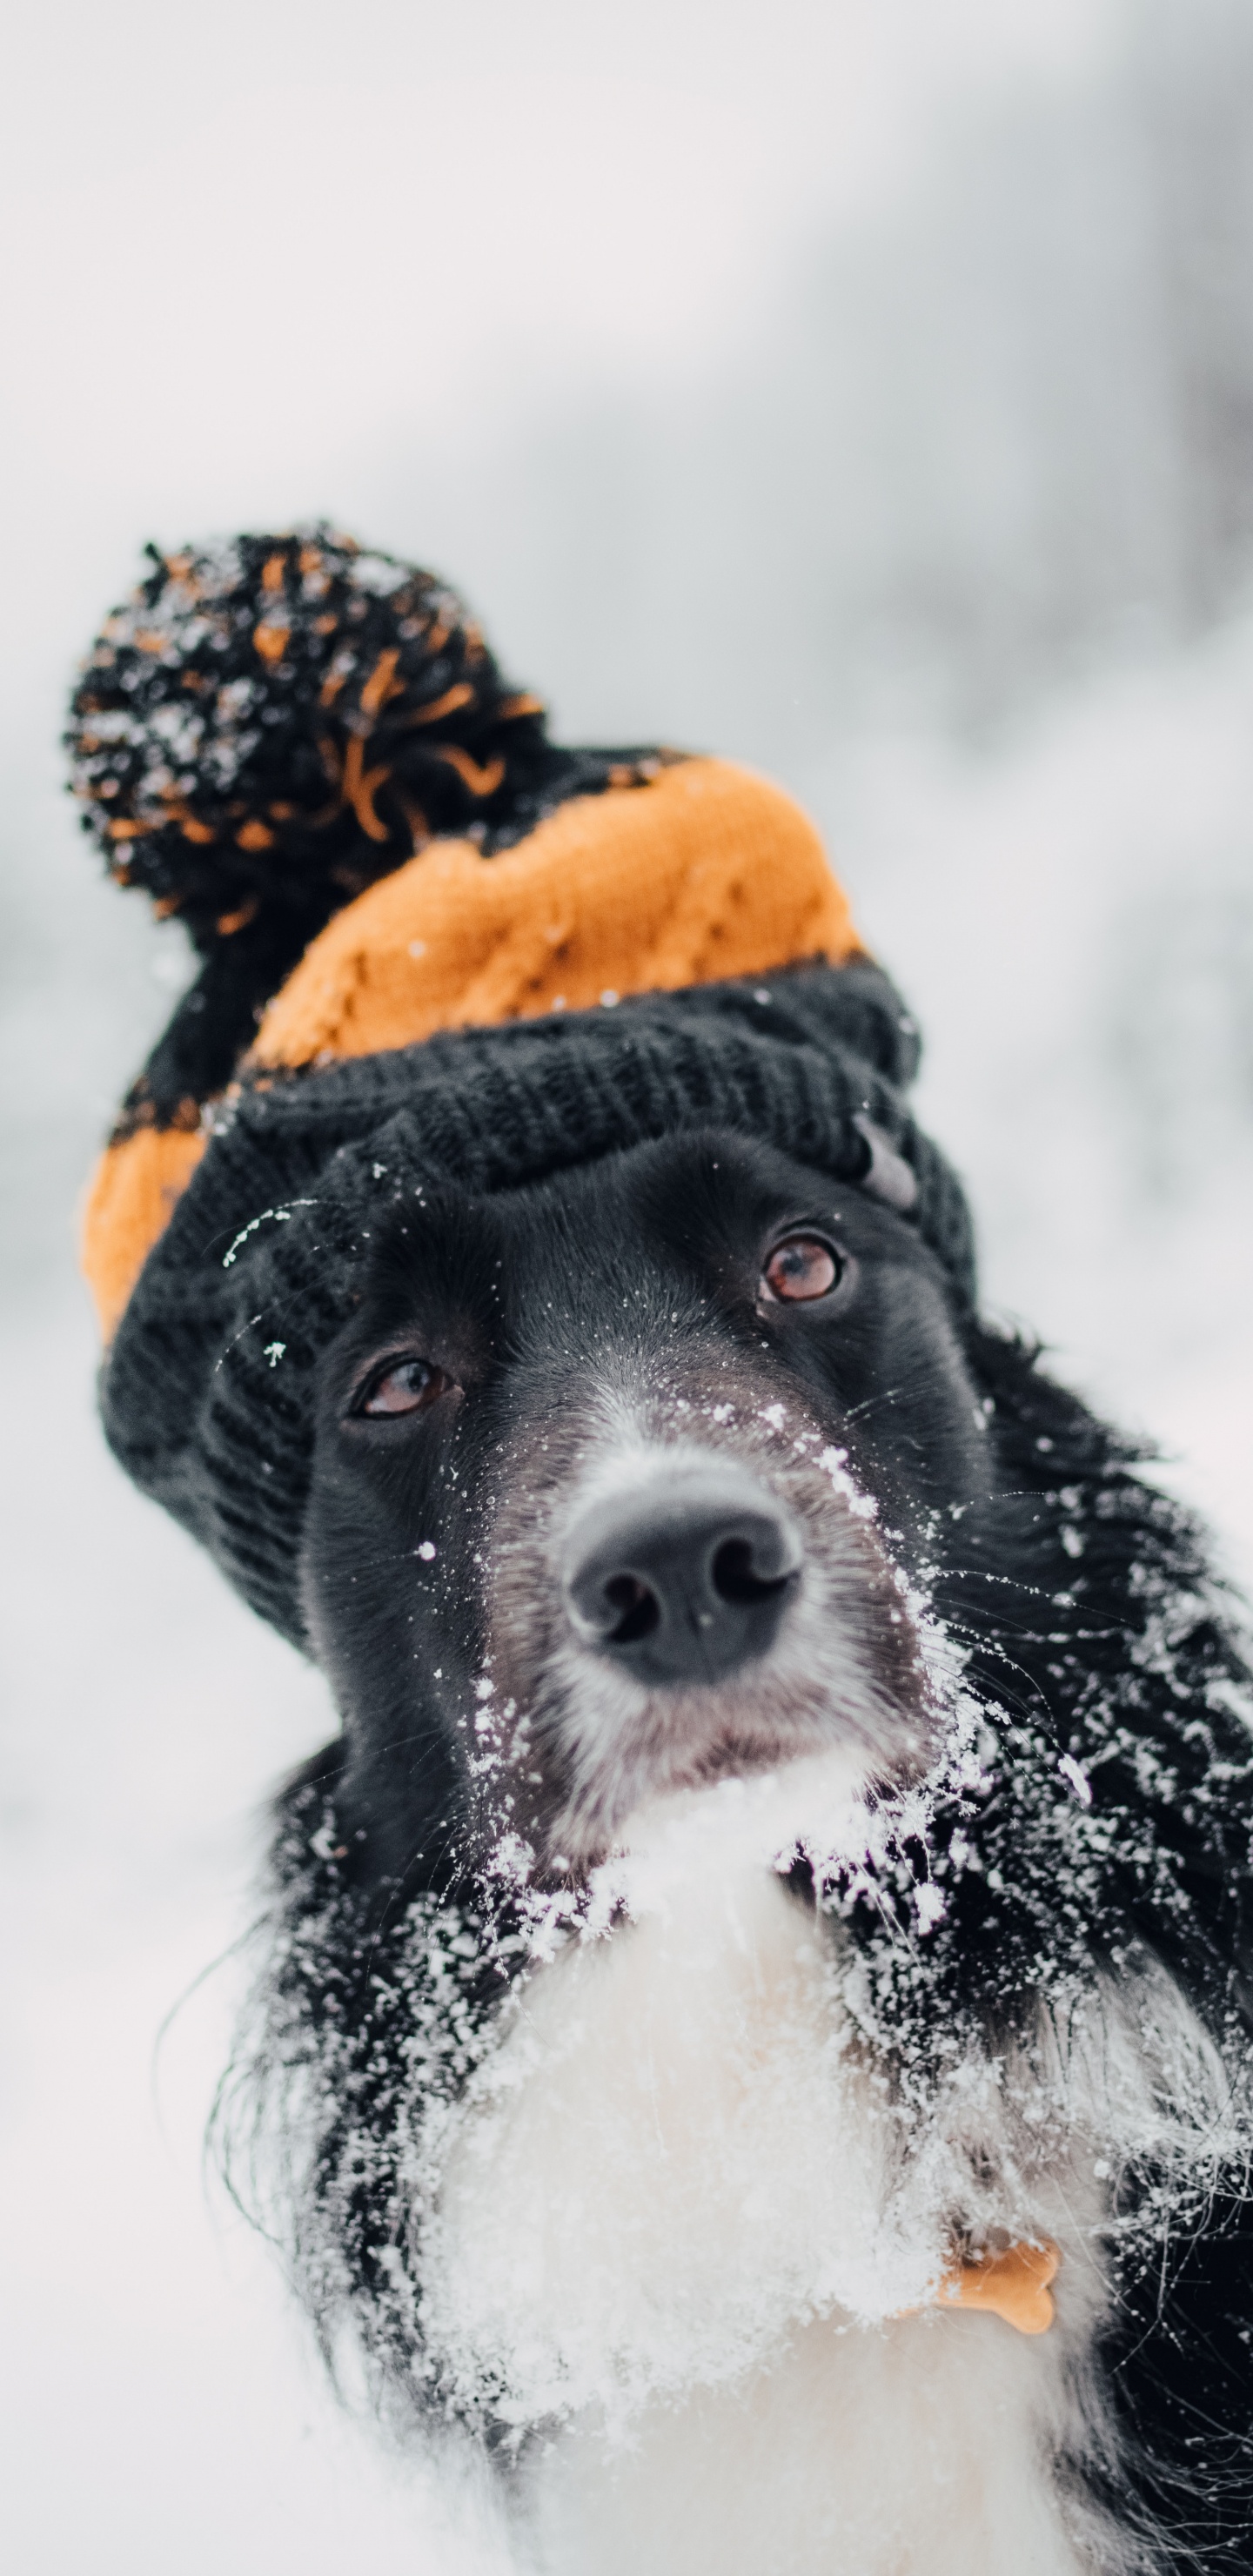 Black and White Border Collie Wearing Orange Knit Cap and Orange Knit Cap. Wallpaper in 1440x2960 Resolution